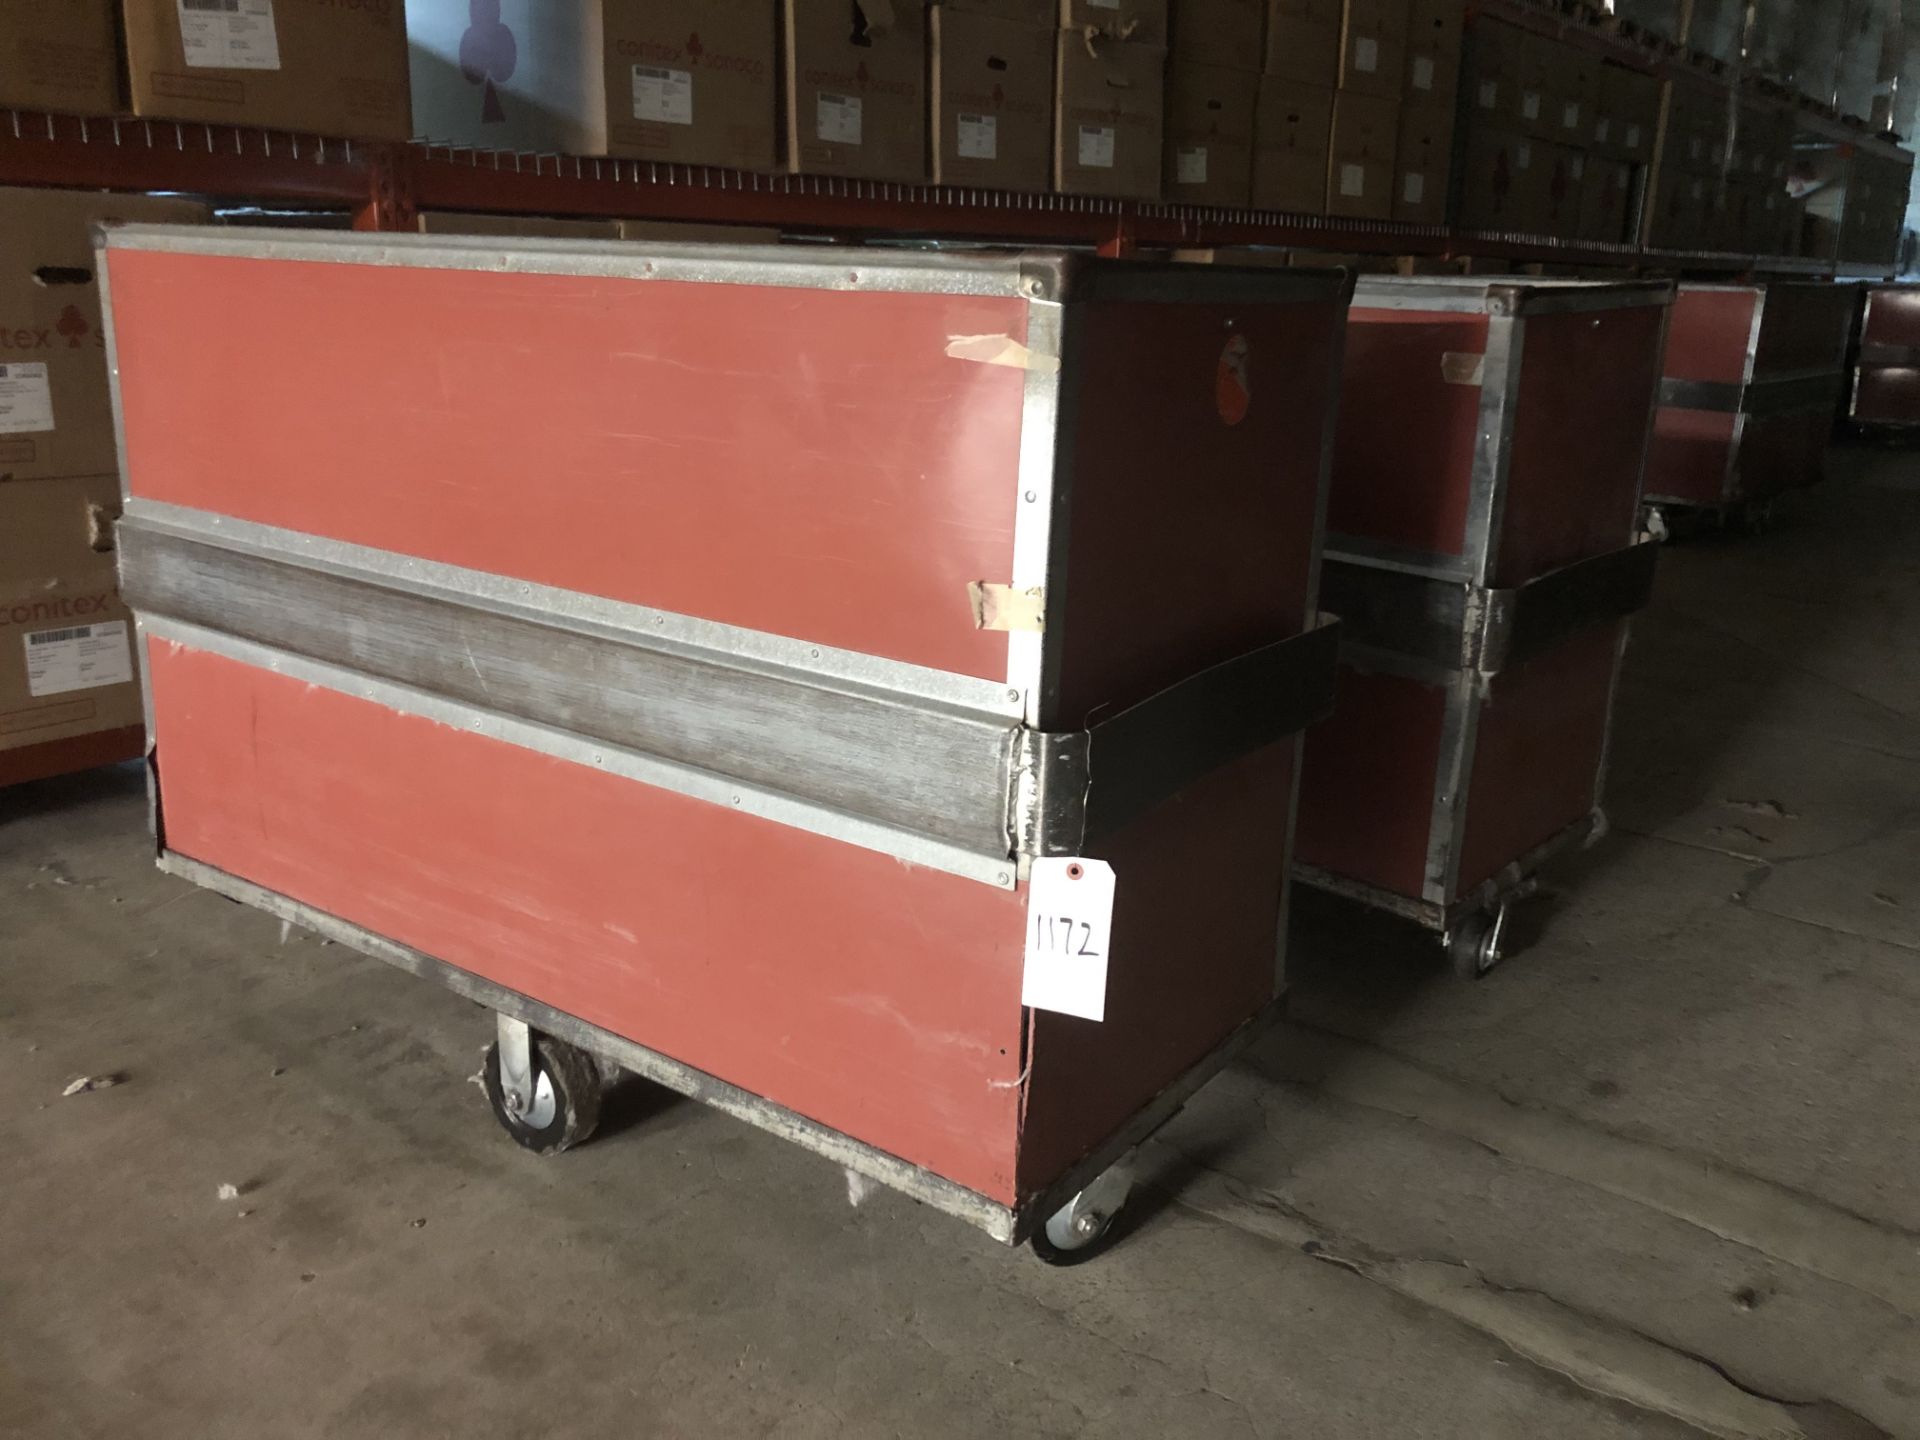 (Qty 12) 4-Wheel Carts, Spring Bottom, Approx 24in x 48in x 36in Rig Fee: $120